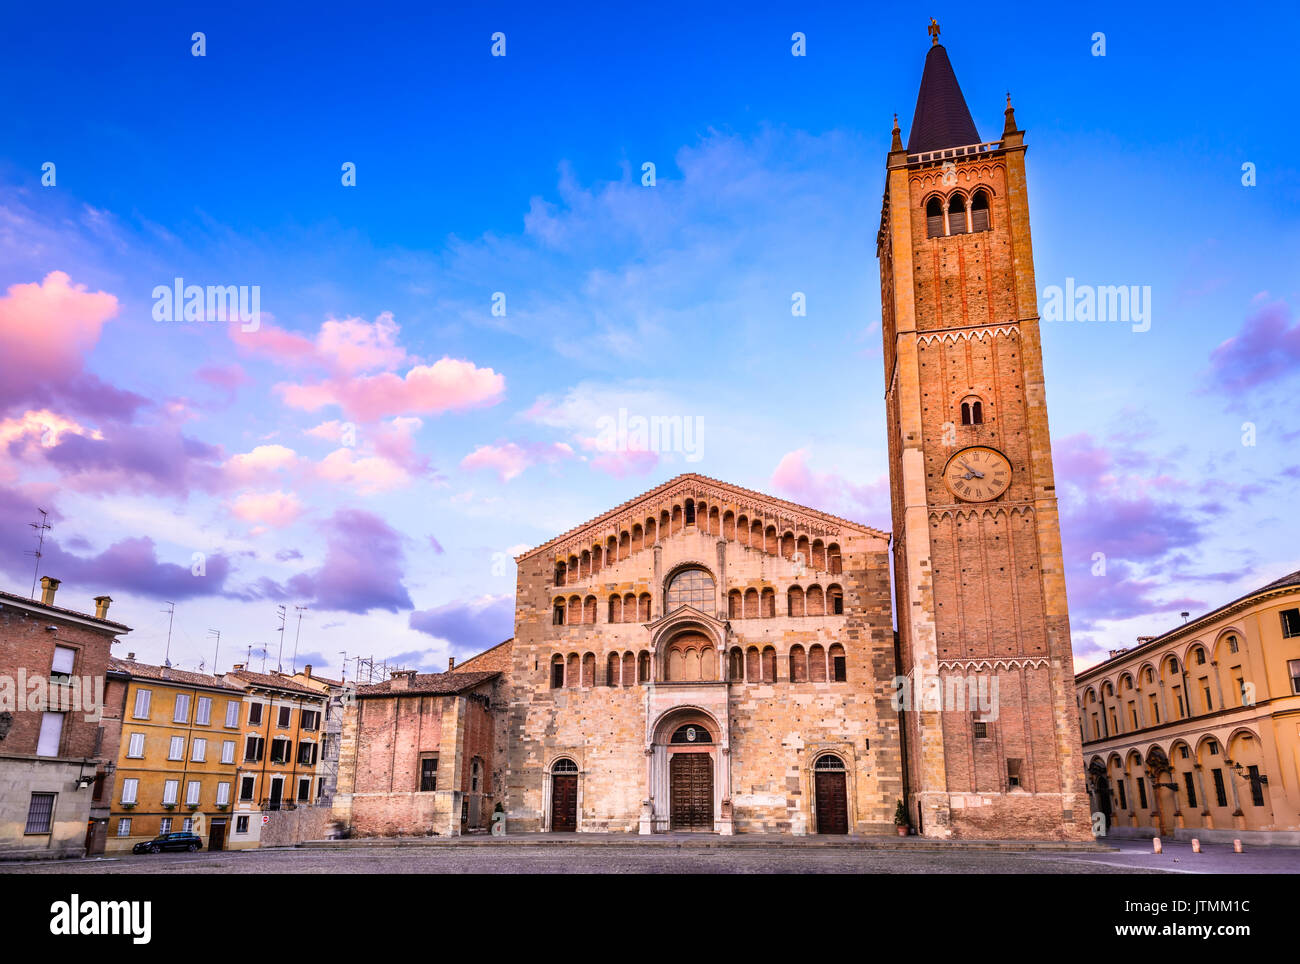 Parma, Italy - Piazza del Duomo with the Cathedral and Baptistery at twilight light. Romanesque architecture in Emilia-Romagna. Stock Photo